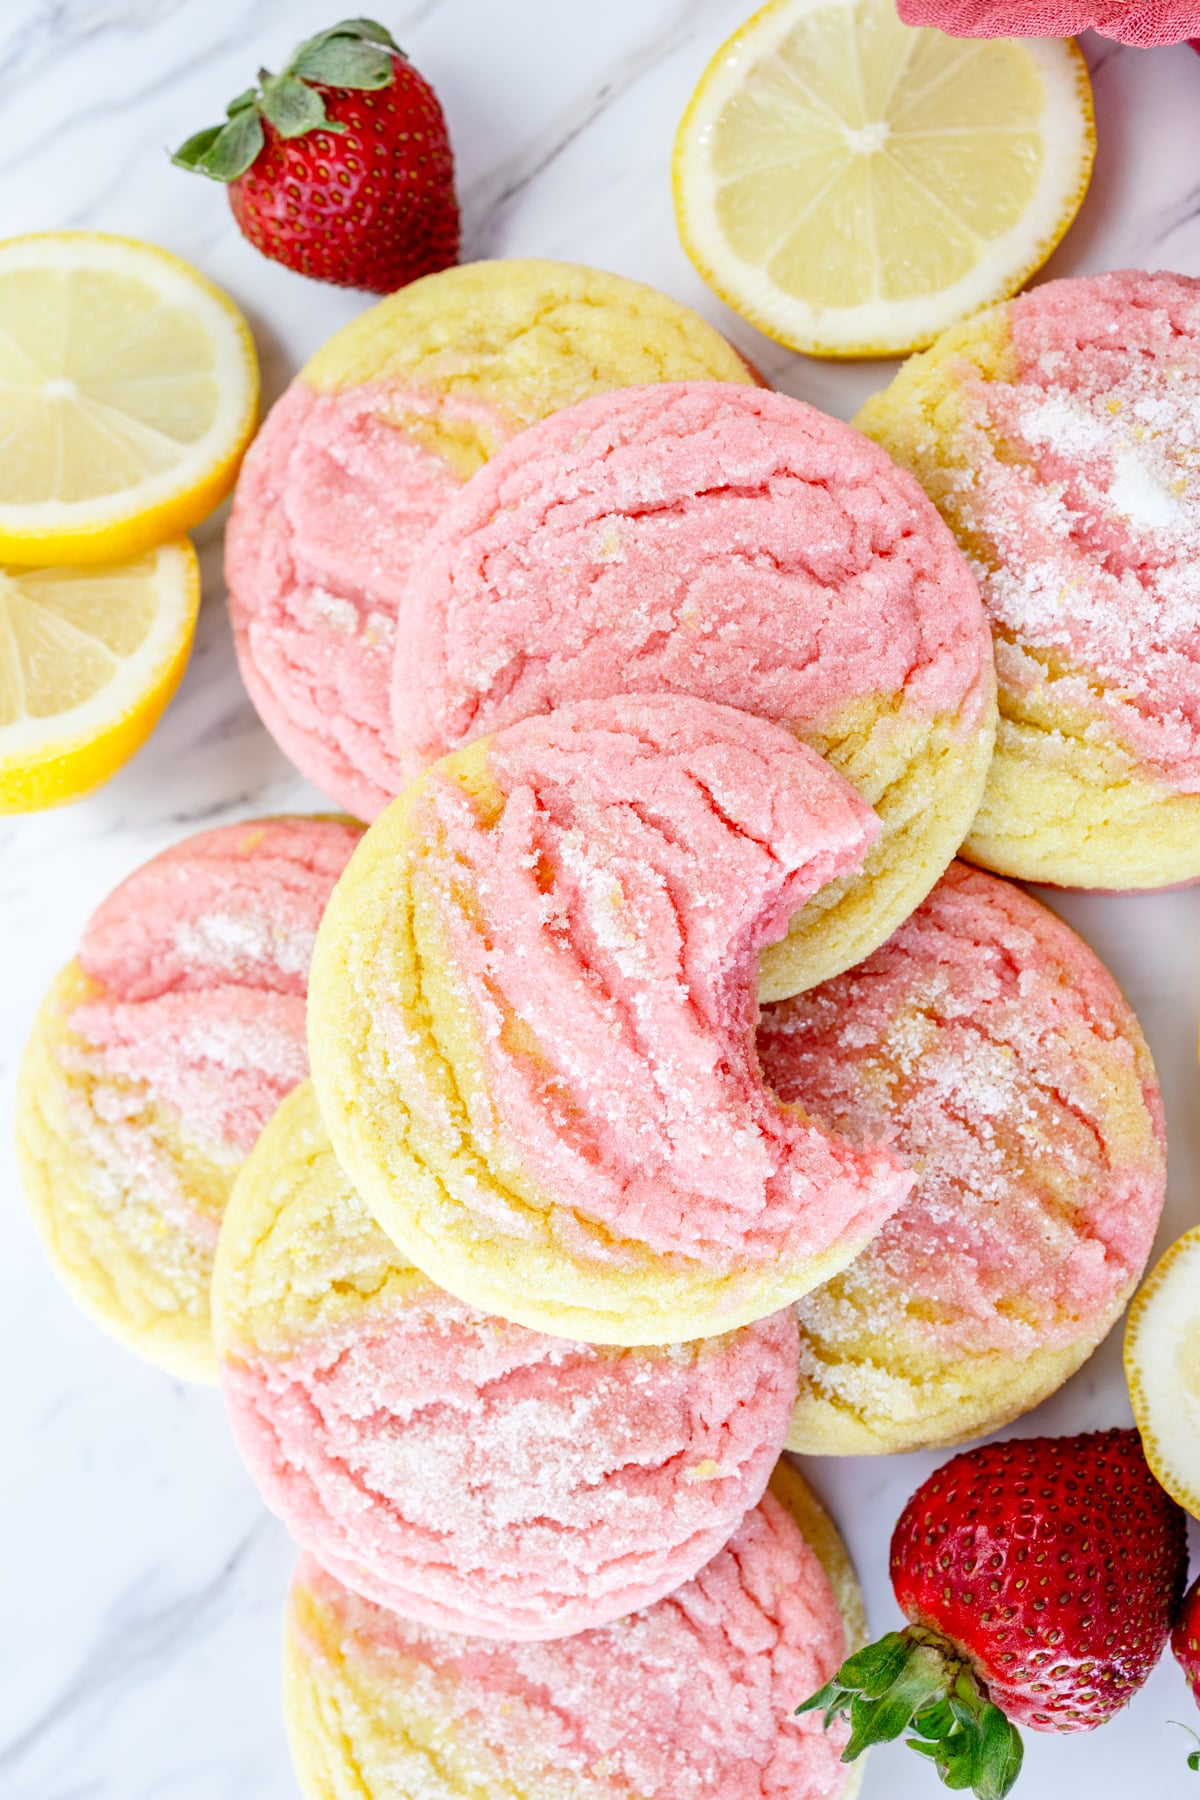 Top view of Strawberry Lemonade Cookies on a grey surface, arranged in a pile alongside strawberries and slices of lemon.